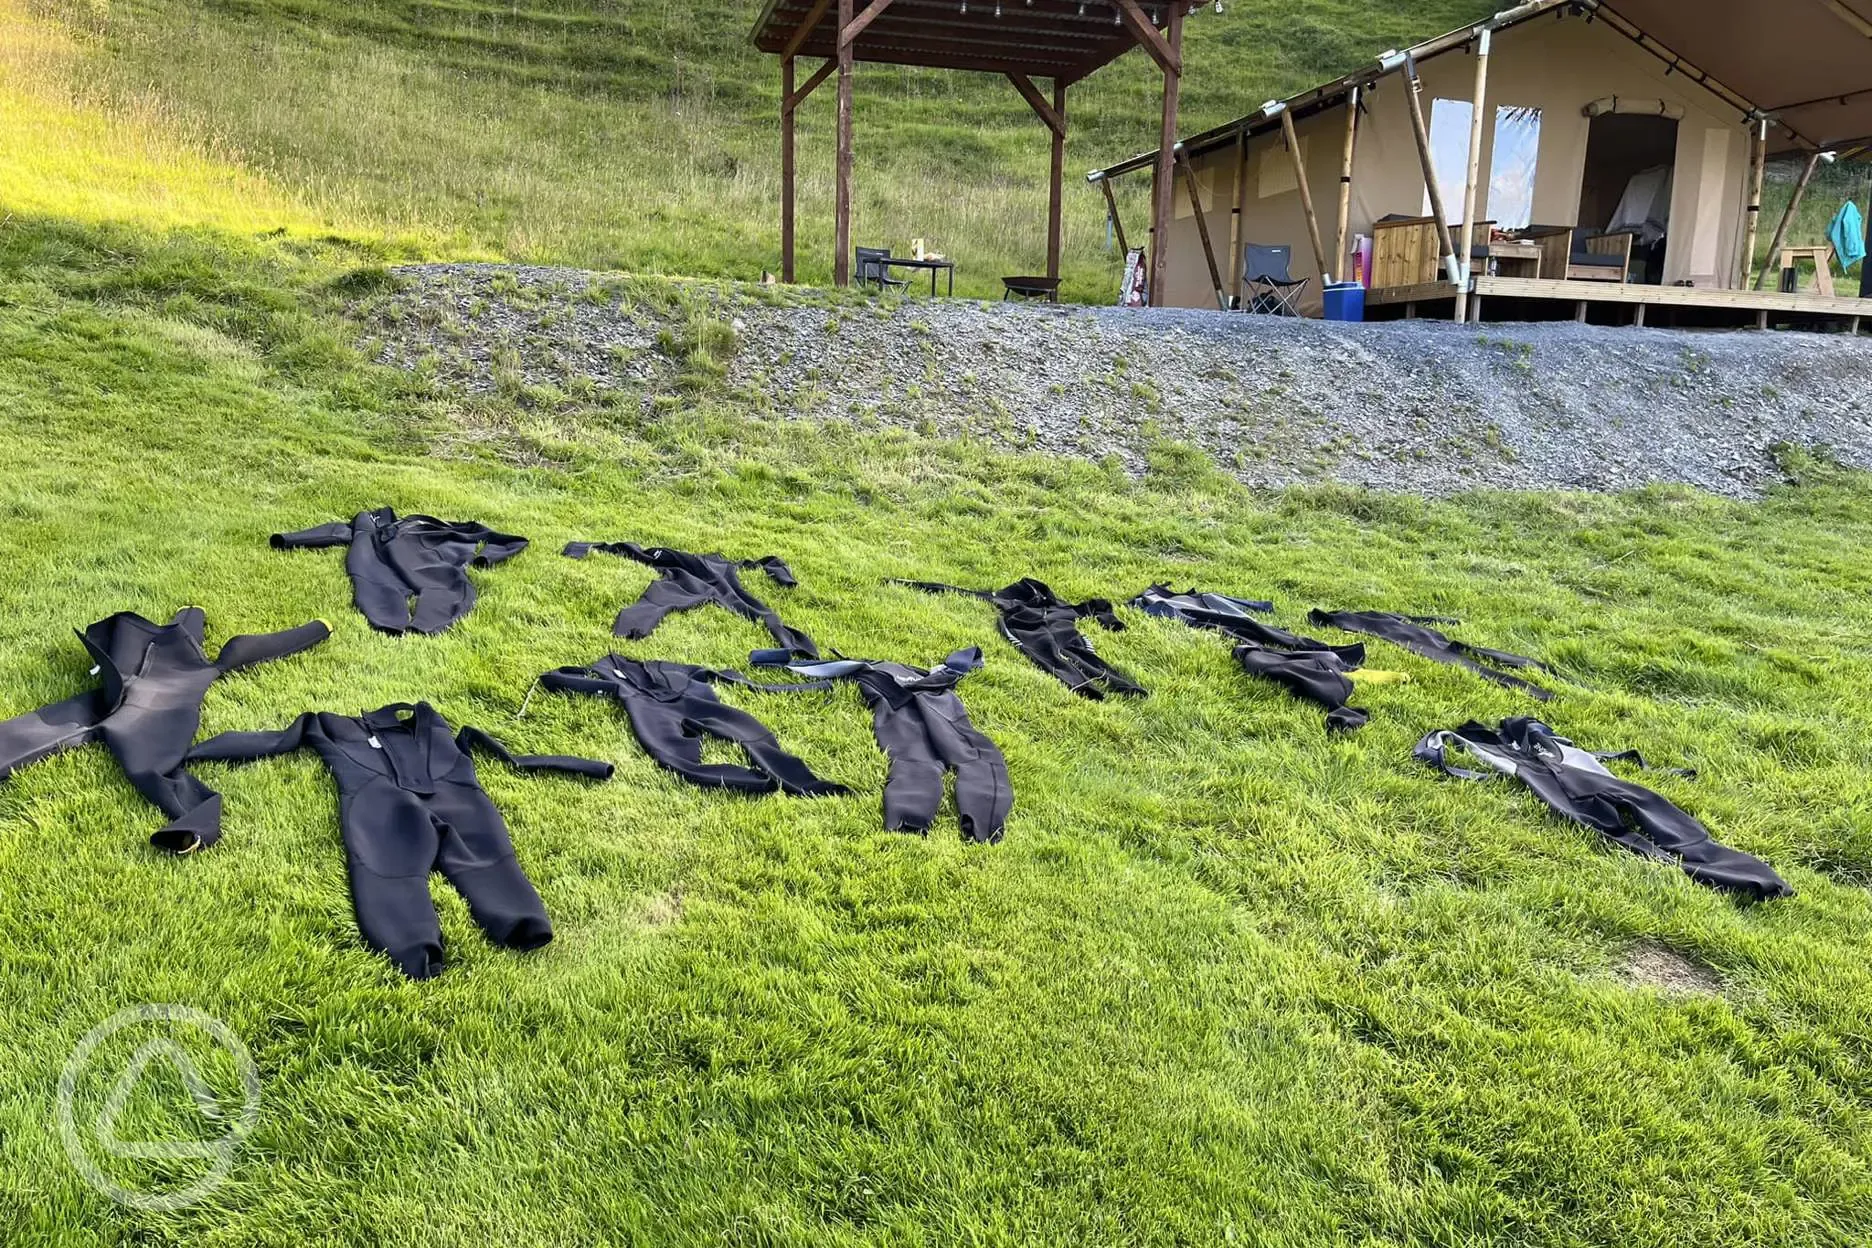 Wetsuits out to dry